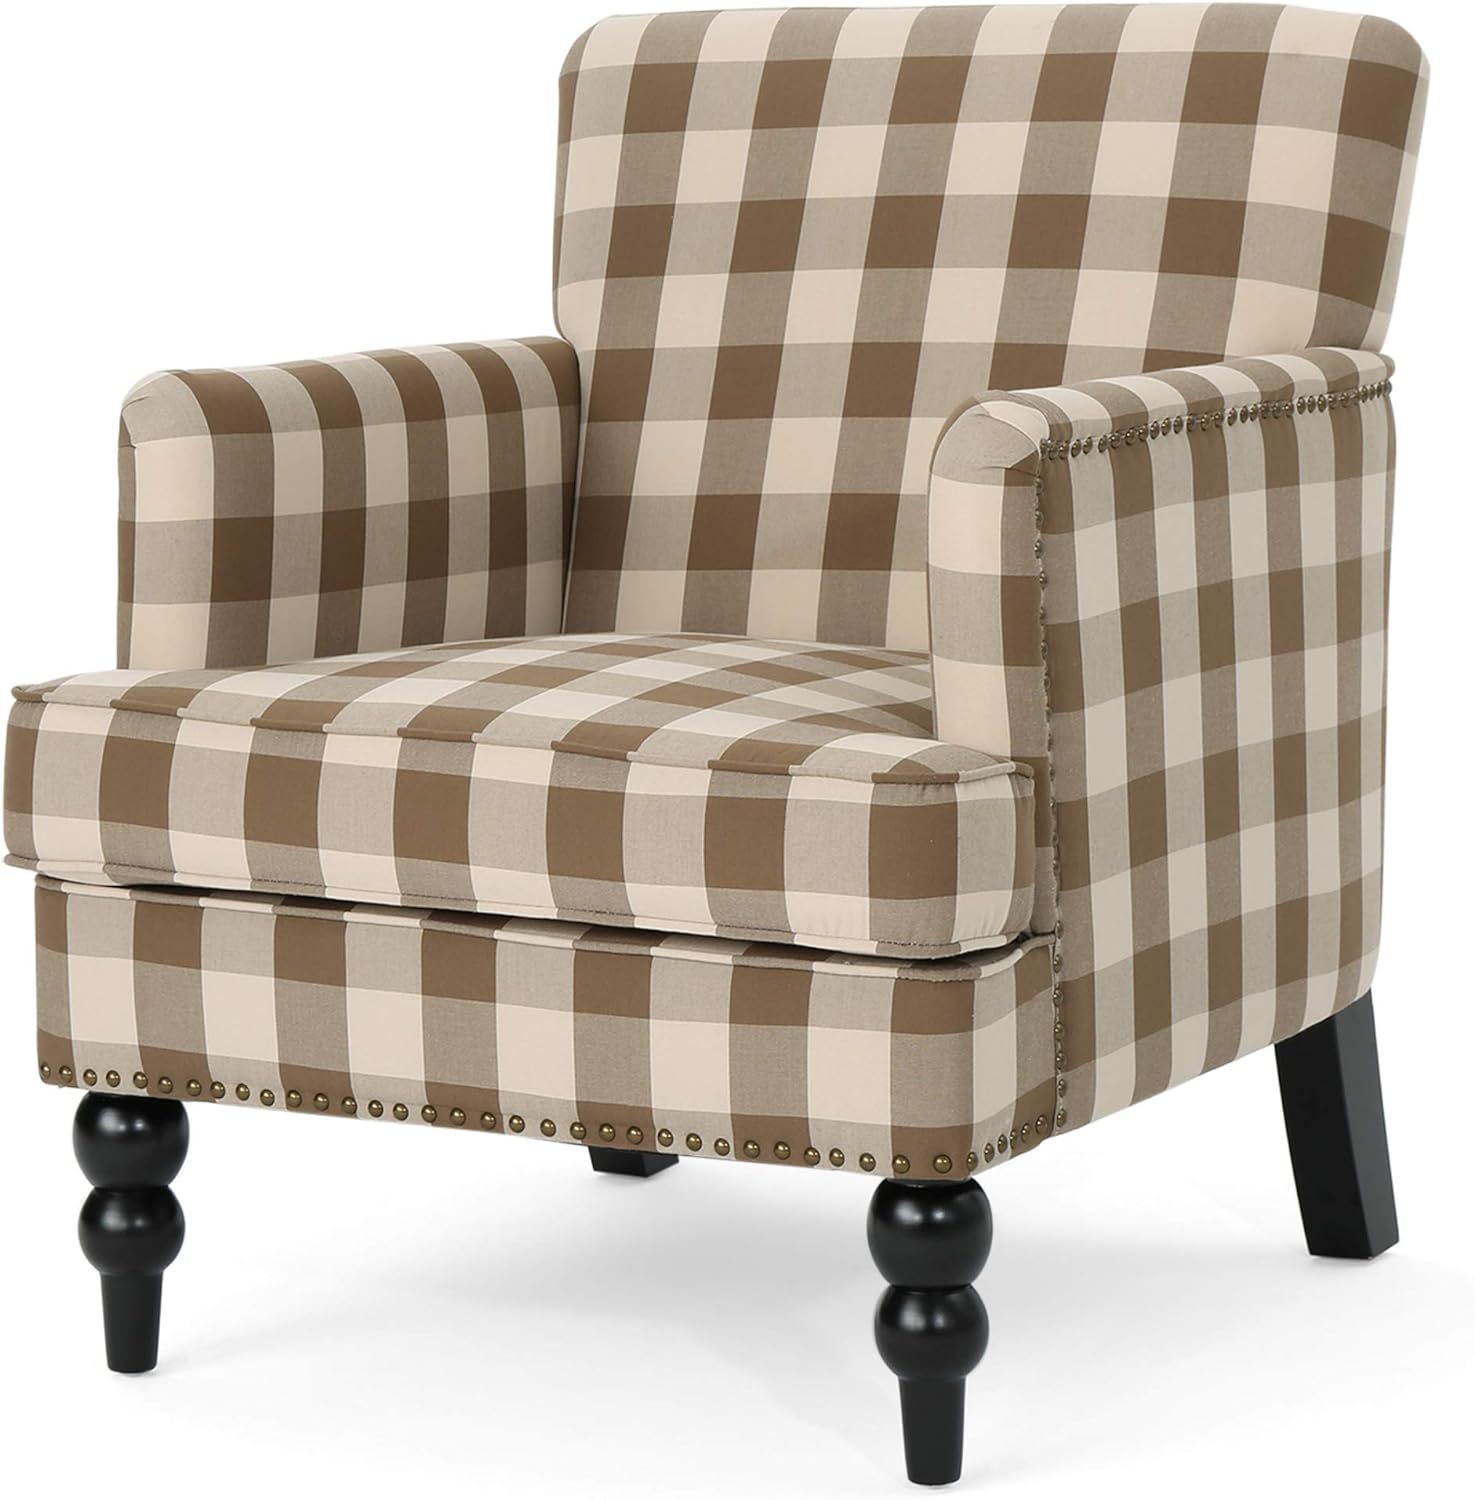 Christopher Knight Home Evete Tufted Fabric Club Chair, Brown Checkerboard, Dark Brown | Amazon (US)